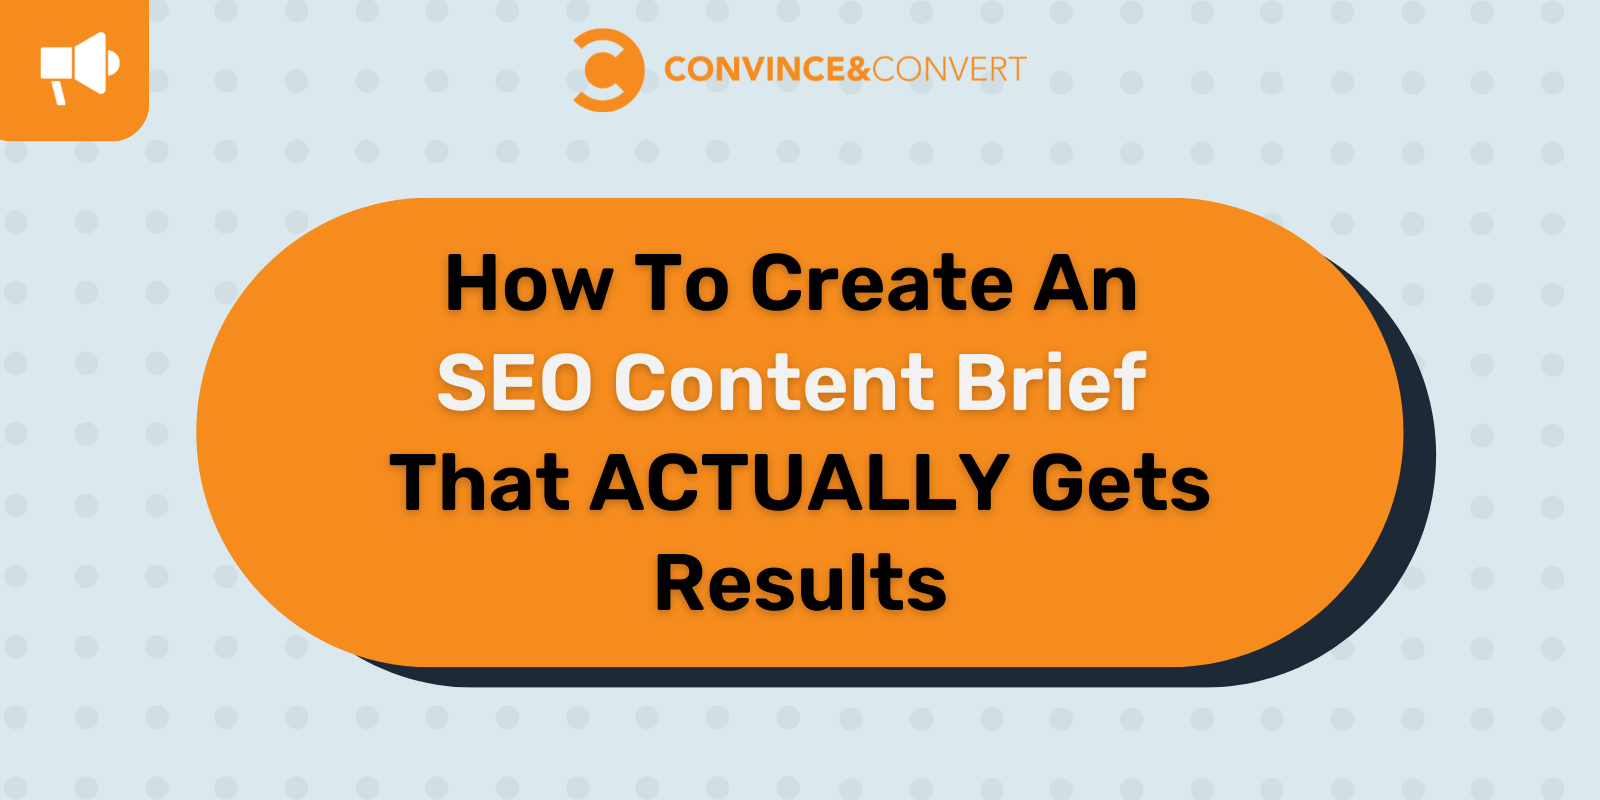 How To Create An SEO Content Brief That ACTUALLY Gets Results